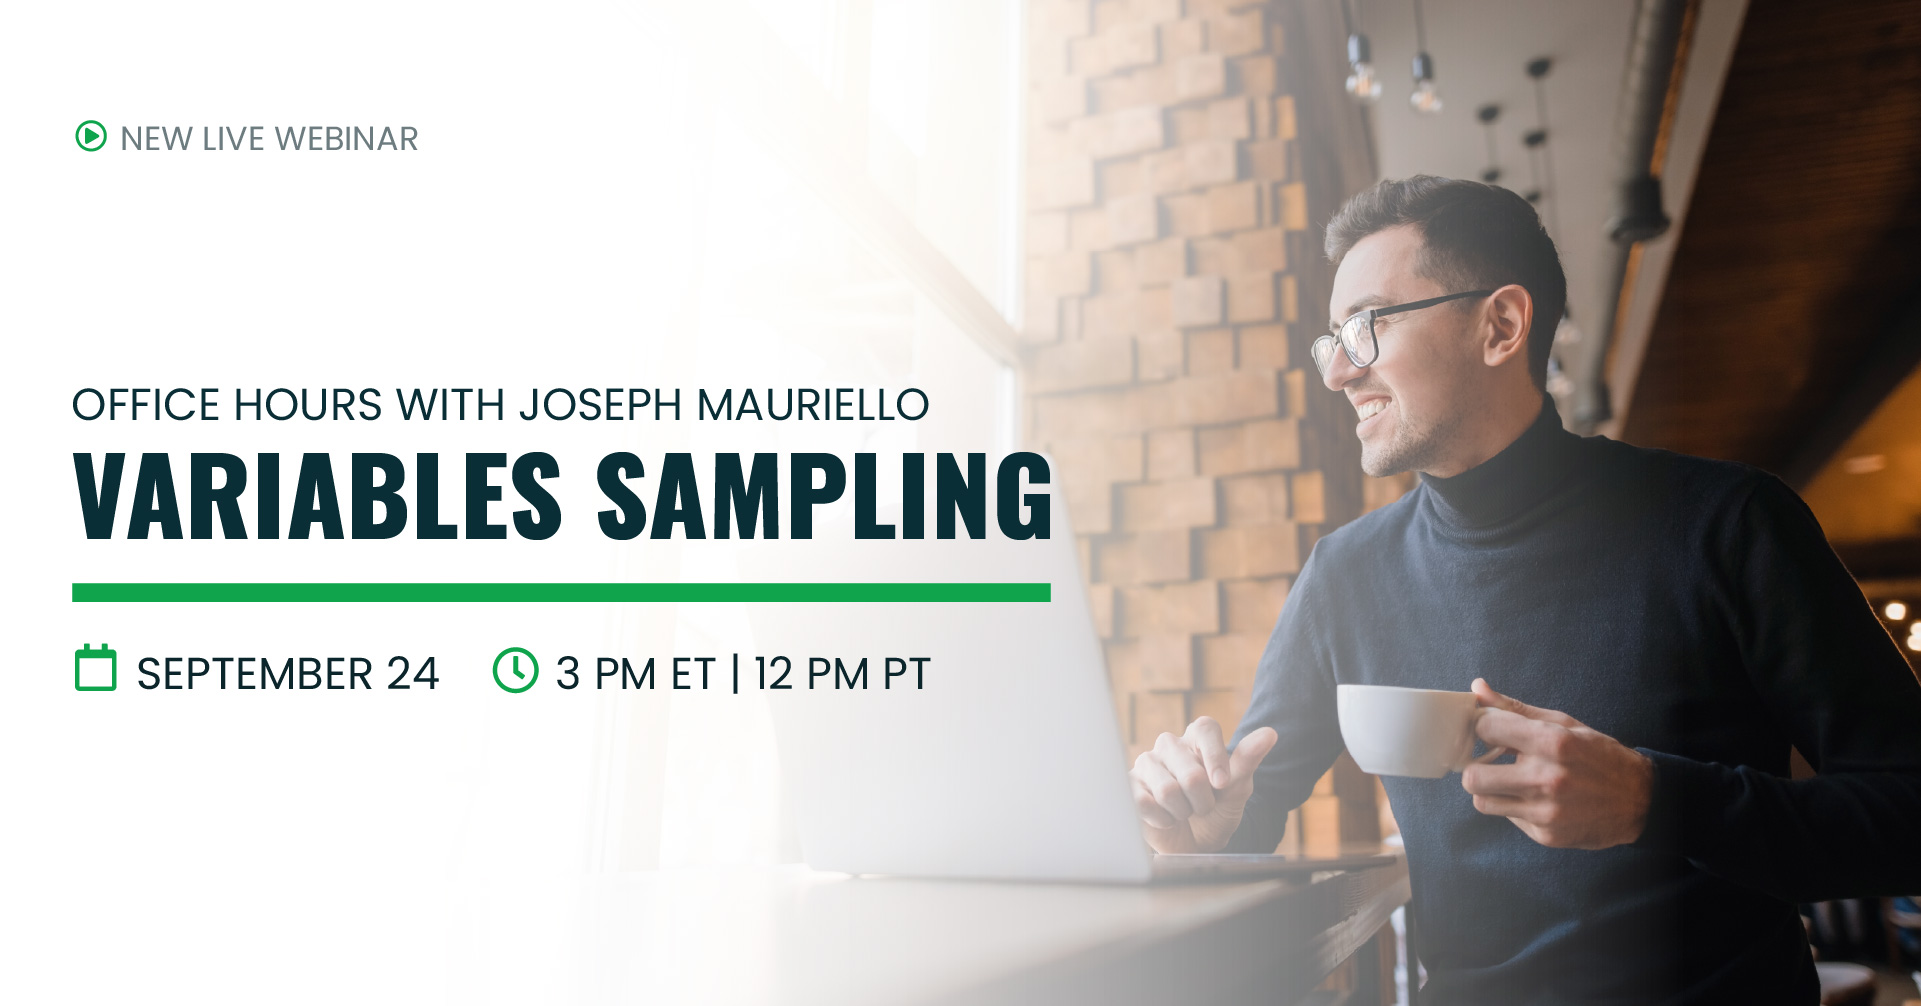 New Live Webinar | Office Hours with Joseph Mauriello: Variables Sampling | Sept 24